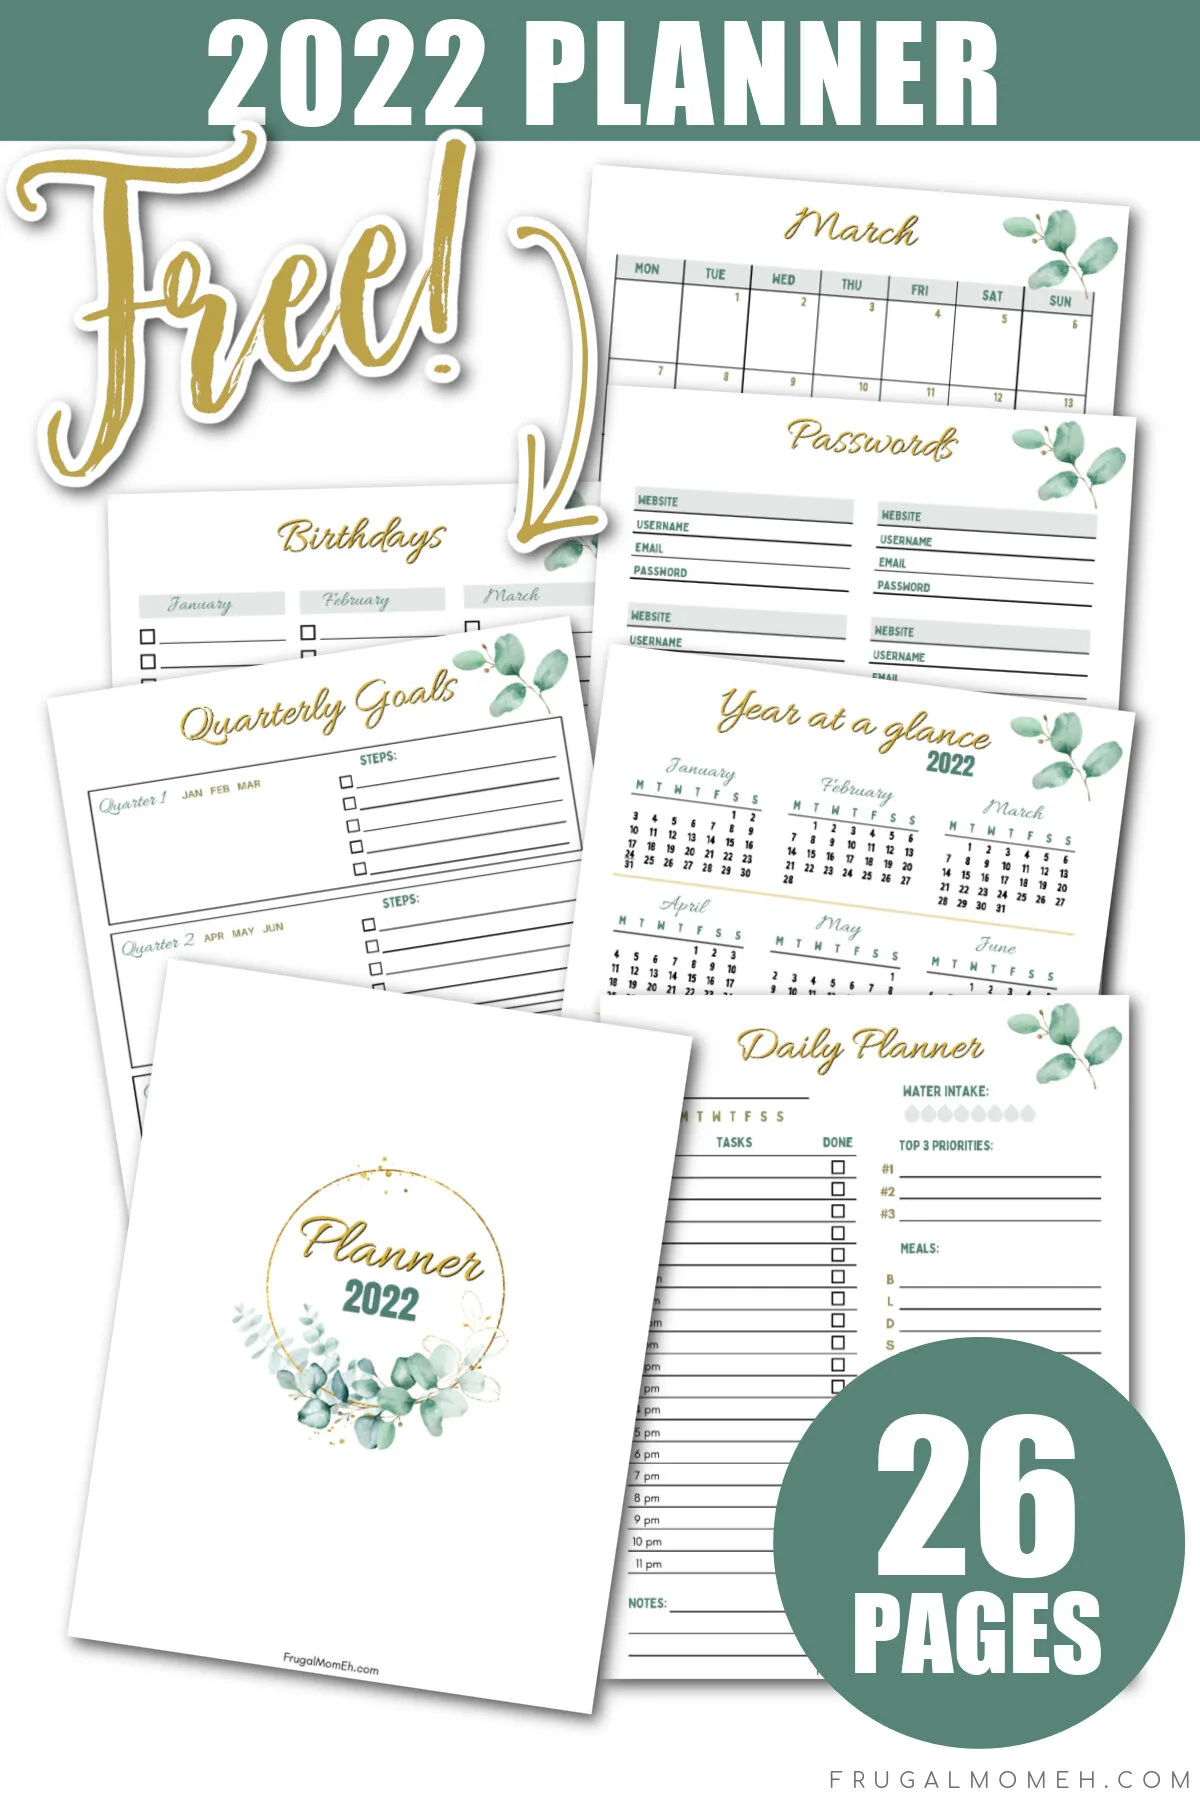 Our free printable 2022 planner comes with 26 pages including a daily planner, a password log, a birthday tracker, and much more!